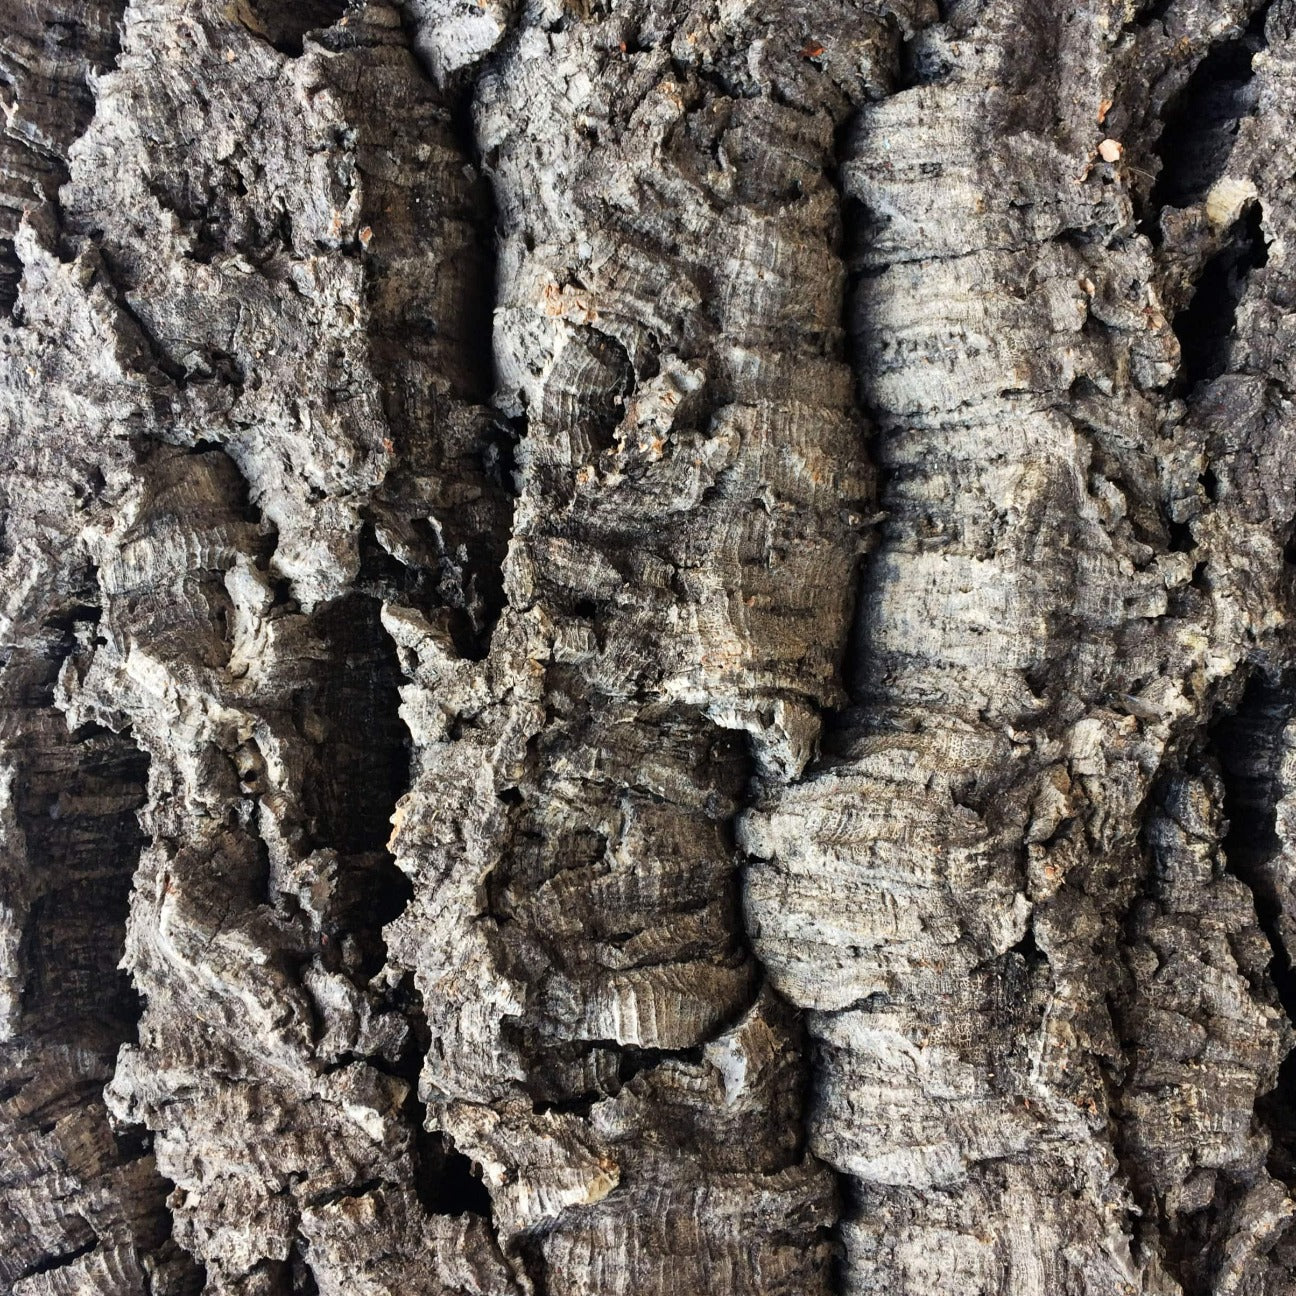 An up close view of the outer grooves on the virgin cork bark.